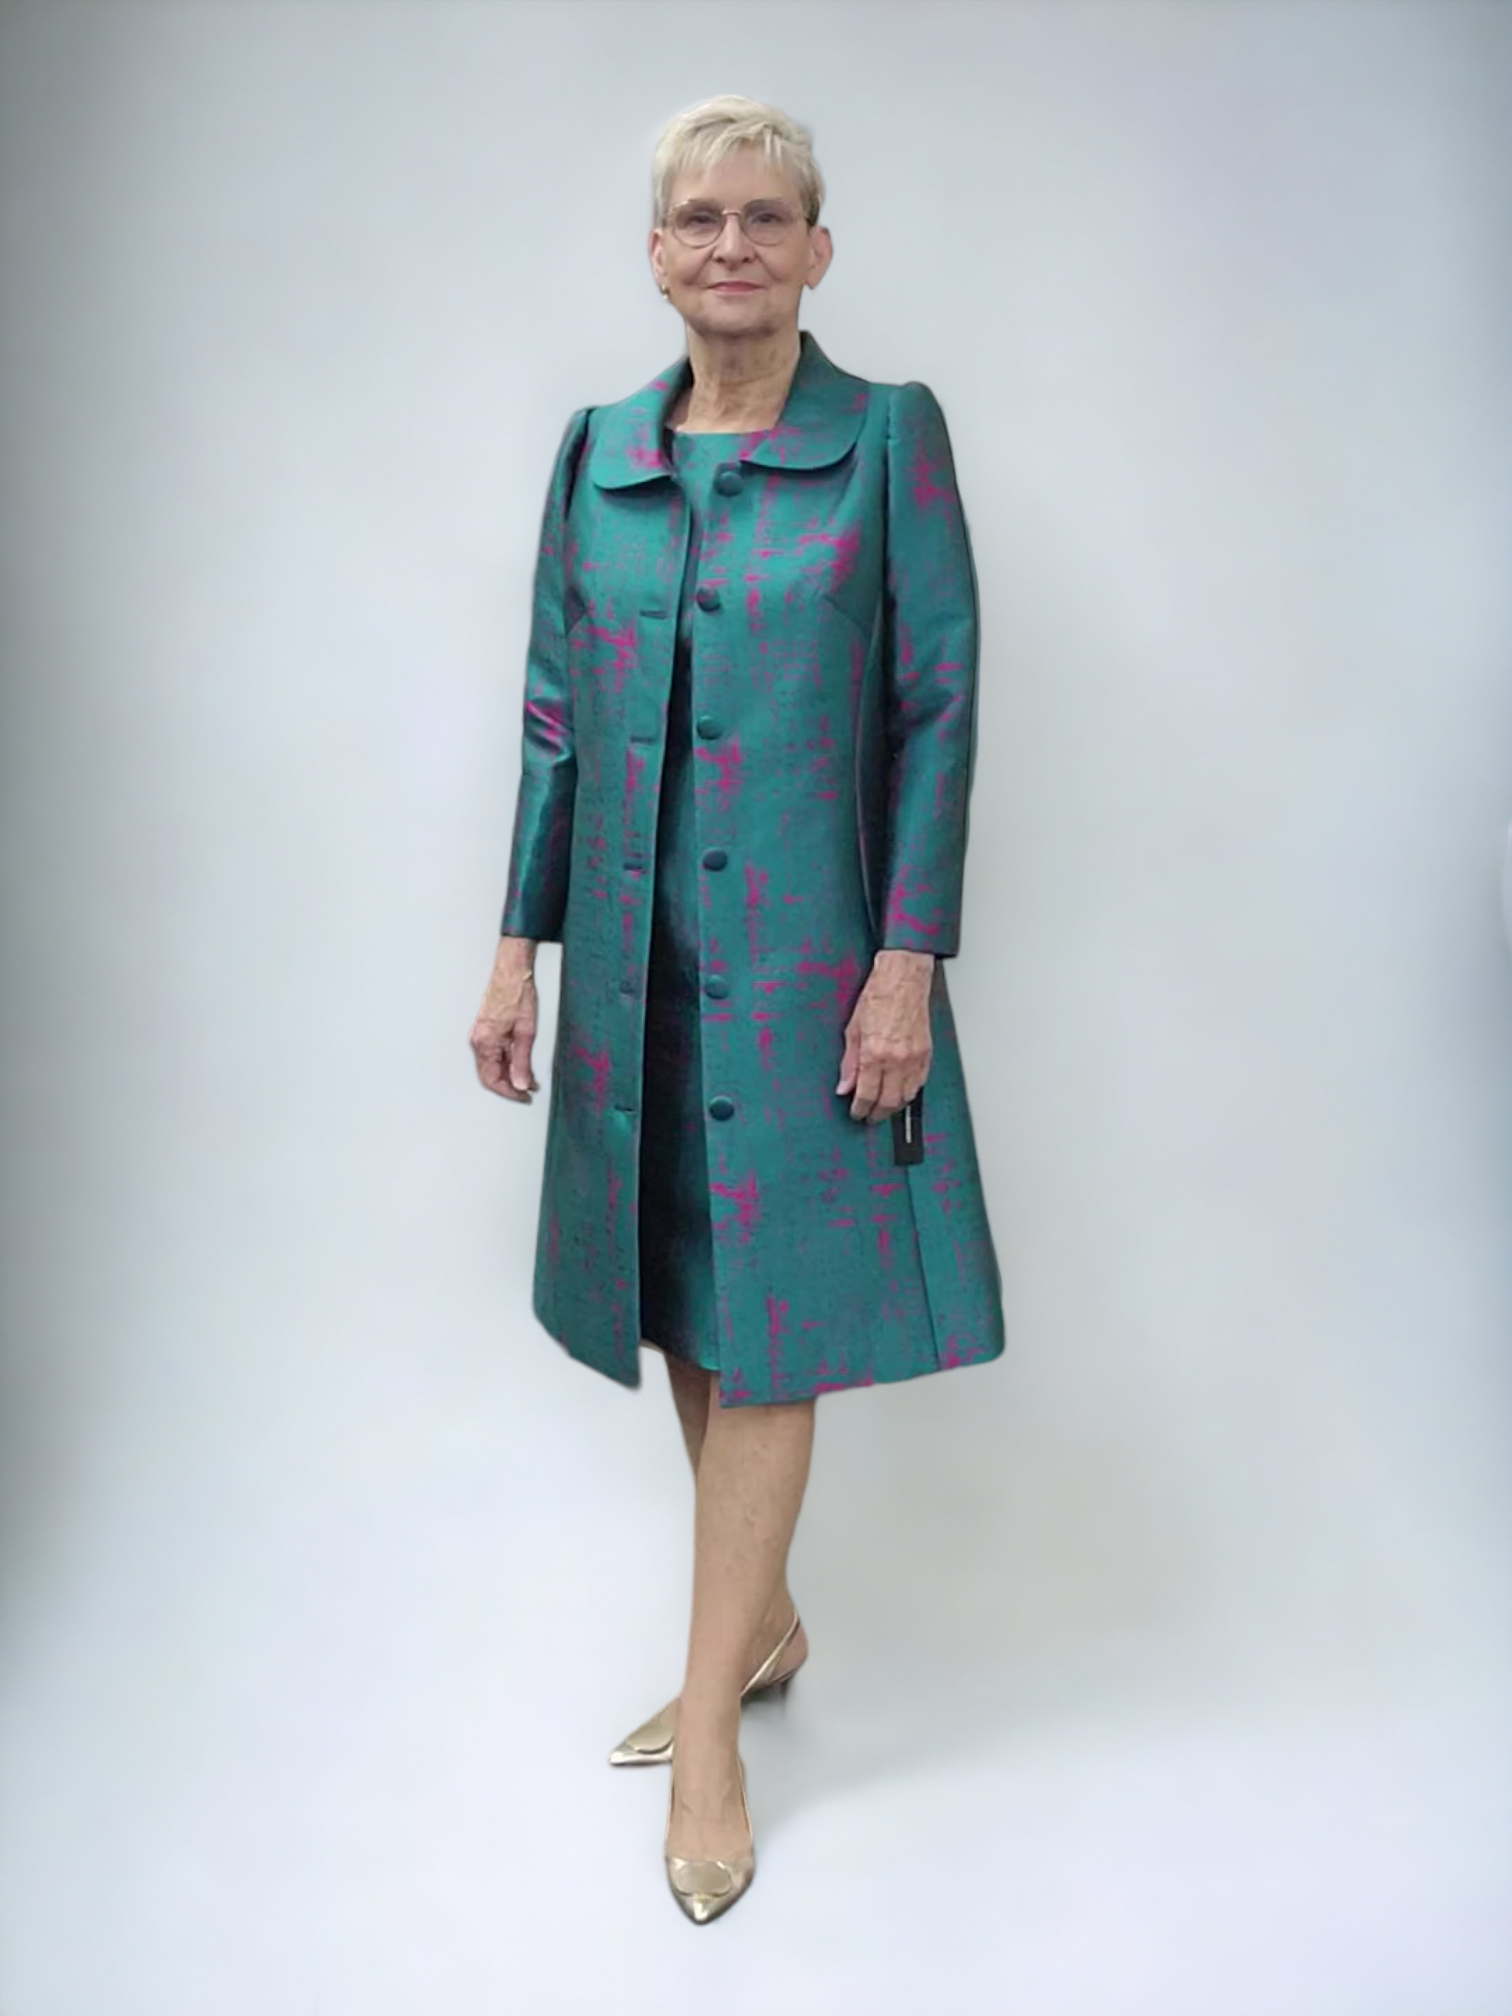 Premier Veni Infantino Designer Range: Finely Tailored Jade Brocade Dress and Coat with Fuchsia Accents -| 992012b.